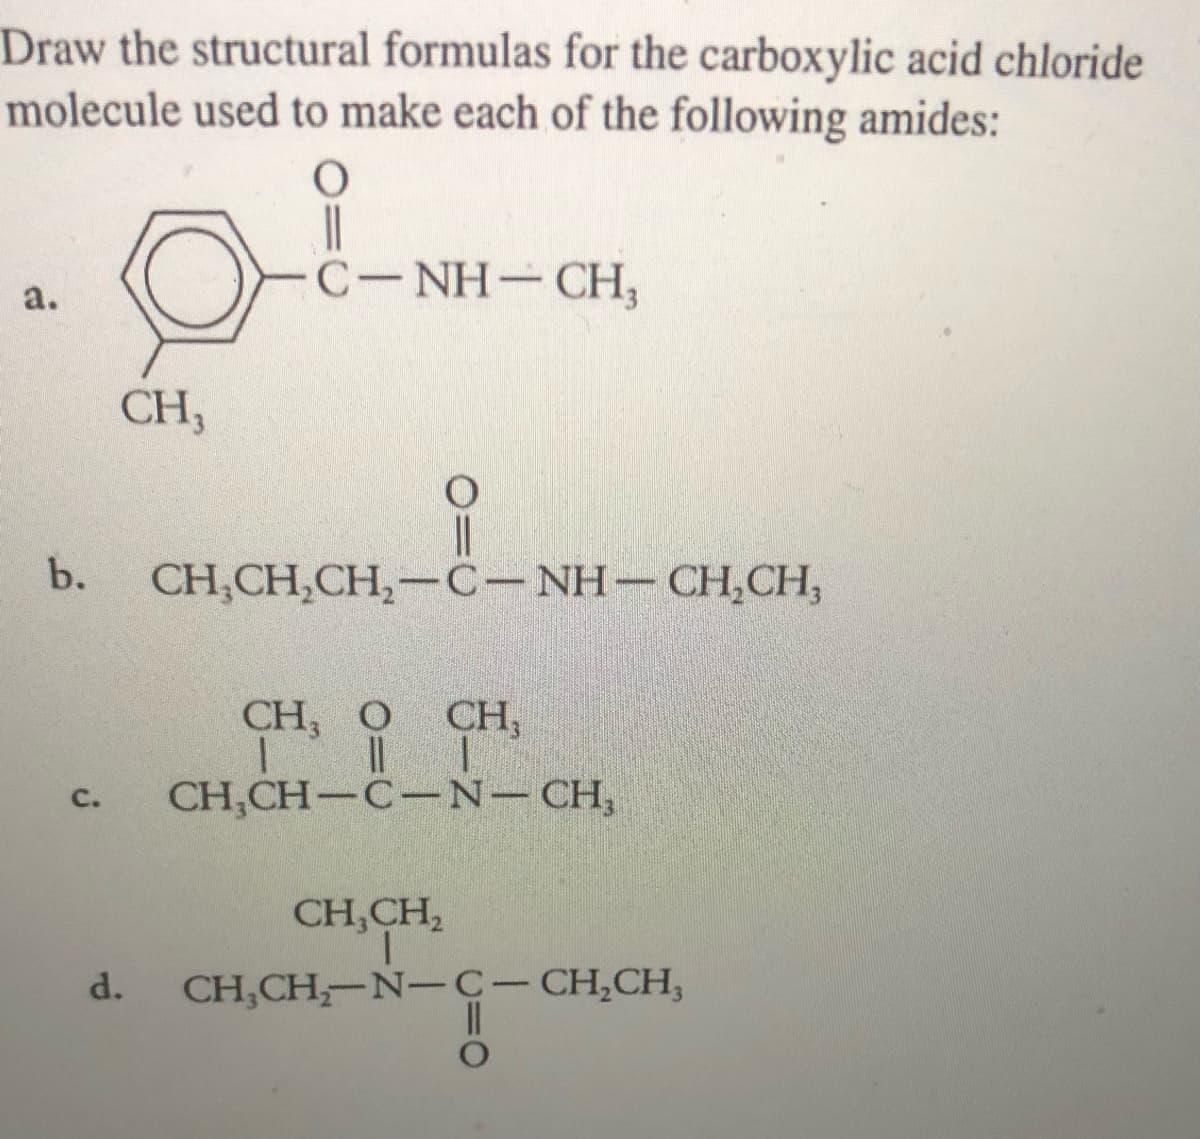 Draw the structural formulas for the carboxylic acid chloride
molecule used to make each of the following amides:
C-NH-CH,
a.
CH,
b.
CH,CH,CH,-C-NH- CH,CH,
CH, O
CH,
C.
CH,CH-C-N-CH,
CH,CH,
d.
CH,CH,-N-C- CH,CH,
|
